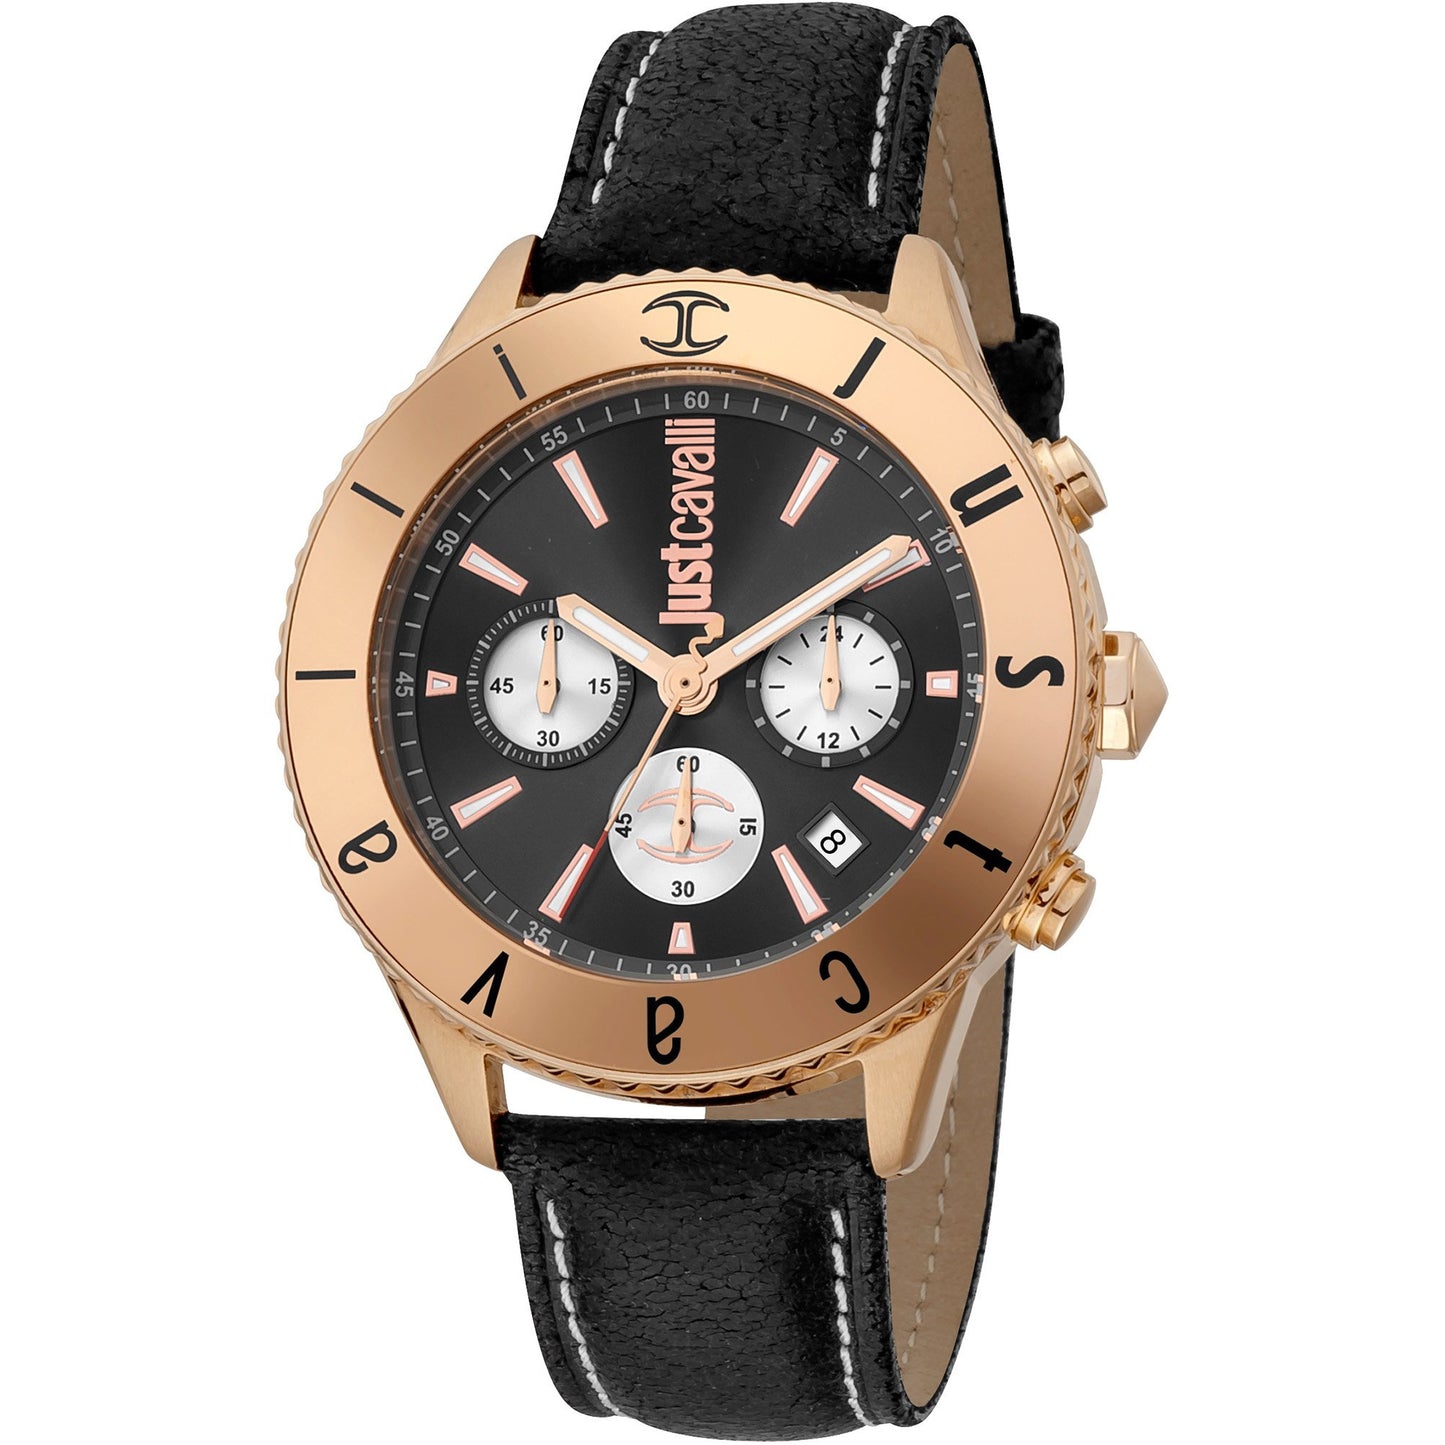 JUST CAVALLI Men's Archimedes Rose Gold/Leather Watch